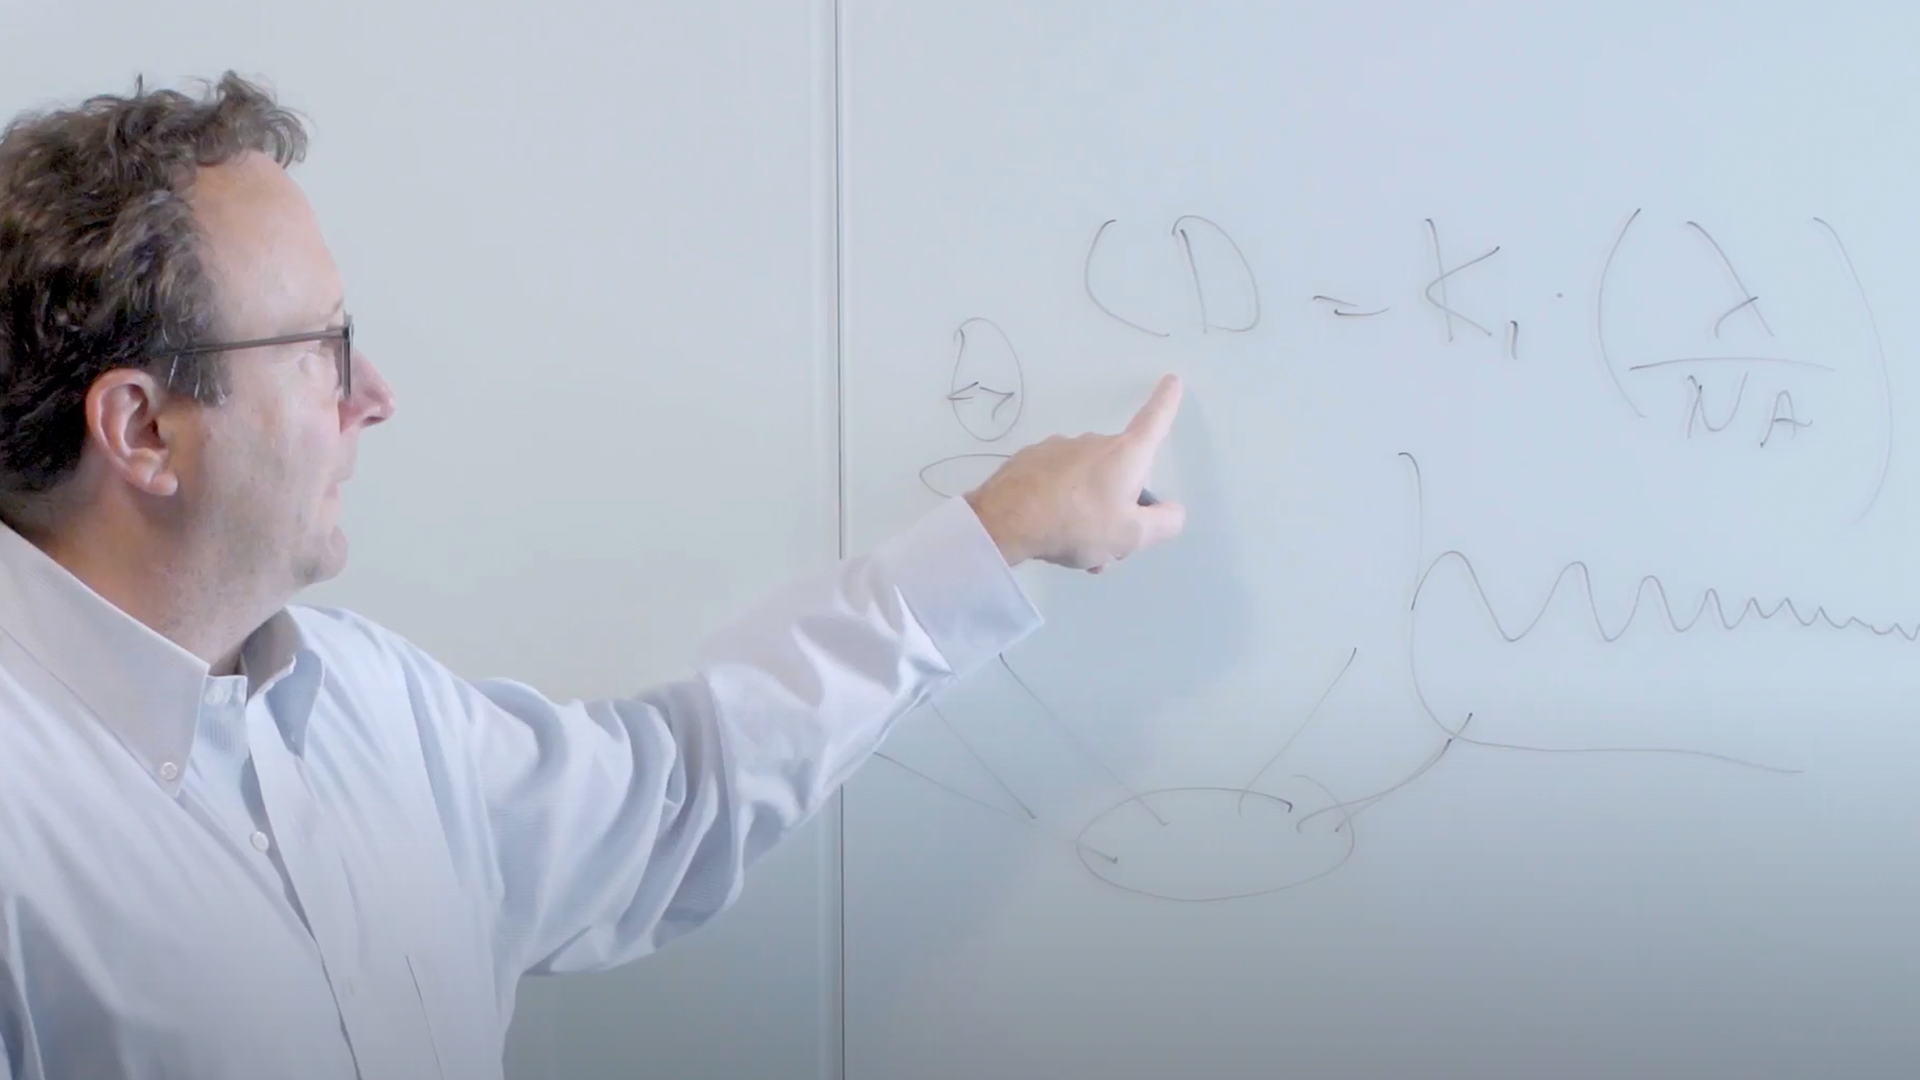 ASML researcher Scott Middlebrooks explains the Rayleigh criterion in a whiteboard session.